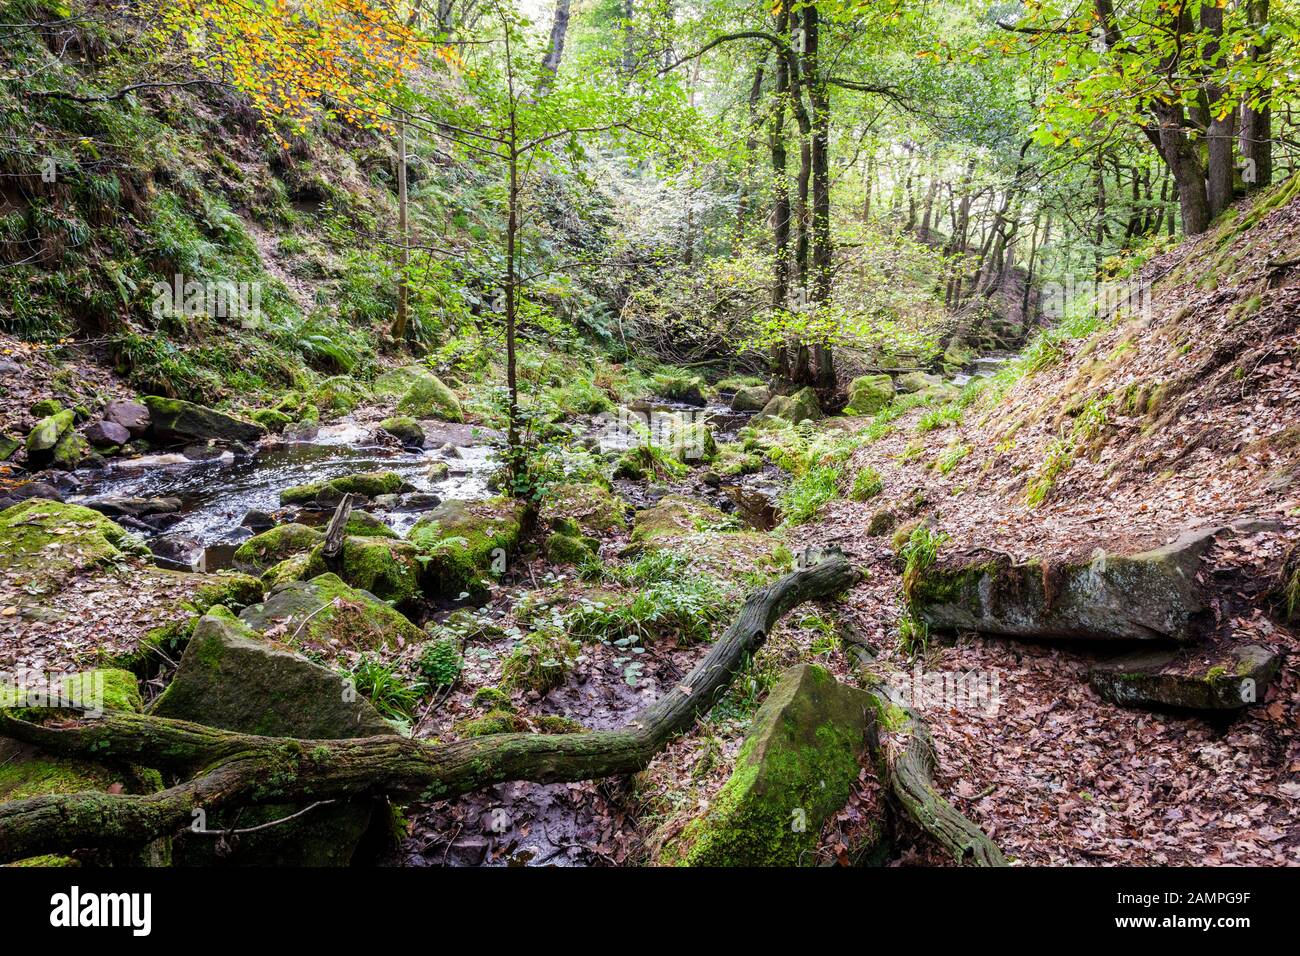 Burbage Brook and trees in ancient woodland during Autumn. Padley Gorge, Derbyshire, Peak District, England, UK Stock Photo